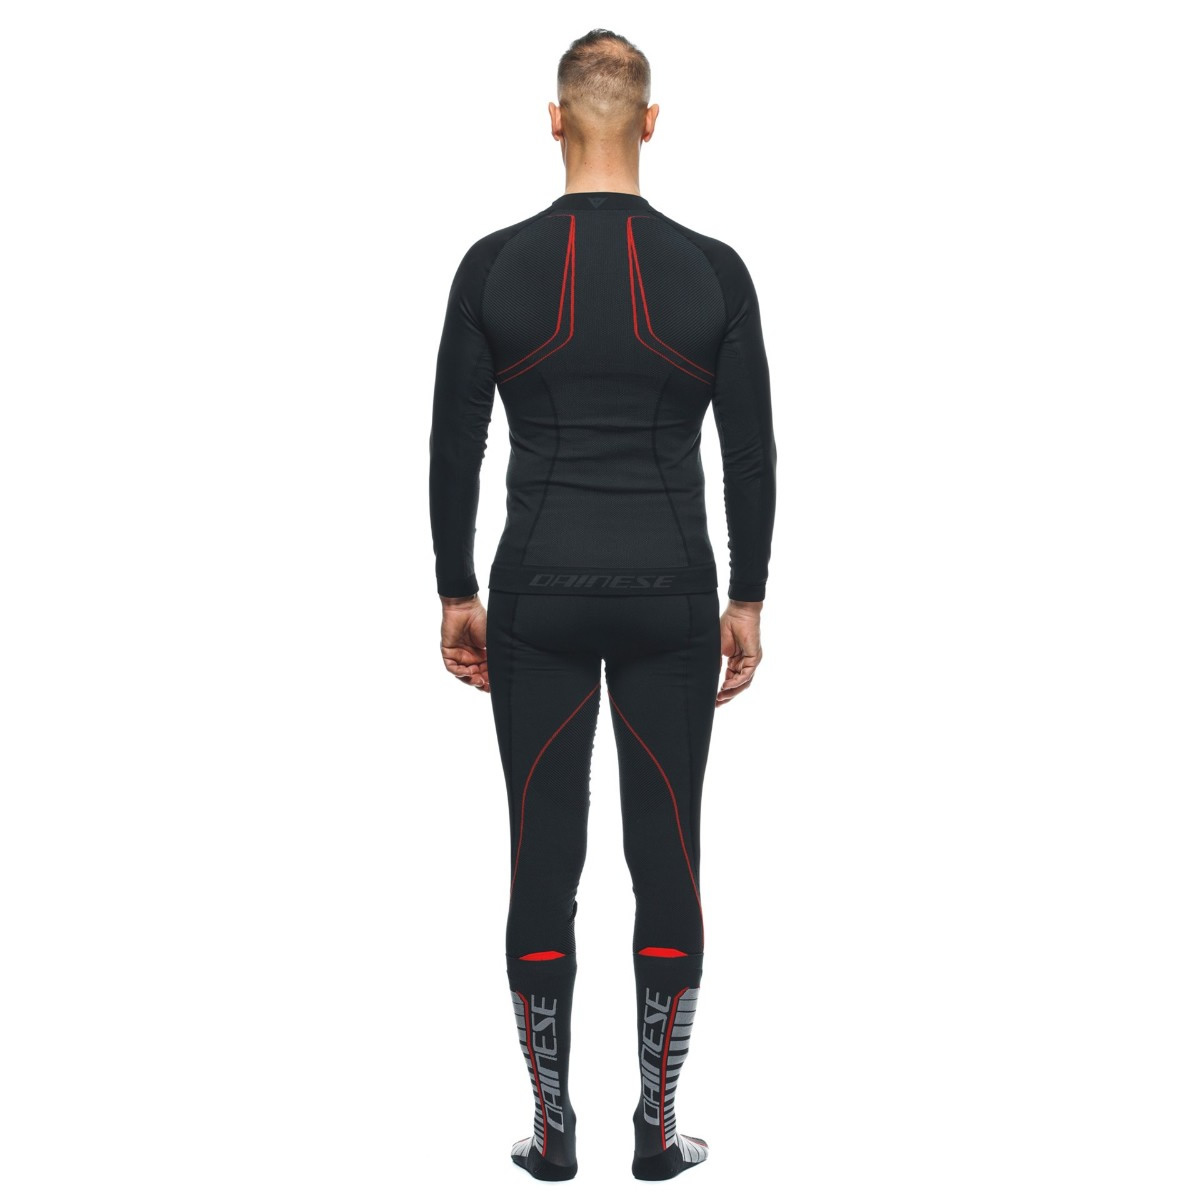 Dainese Funktionsshirt No Wind Thermo LS, schwarz-rot